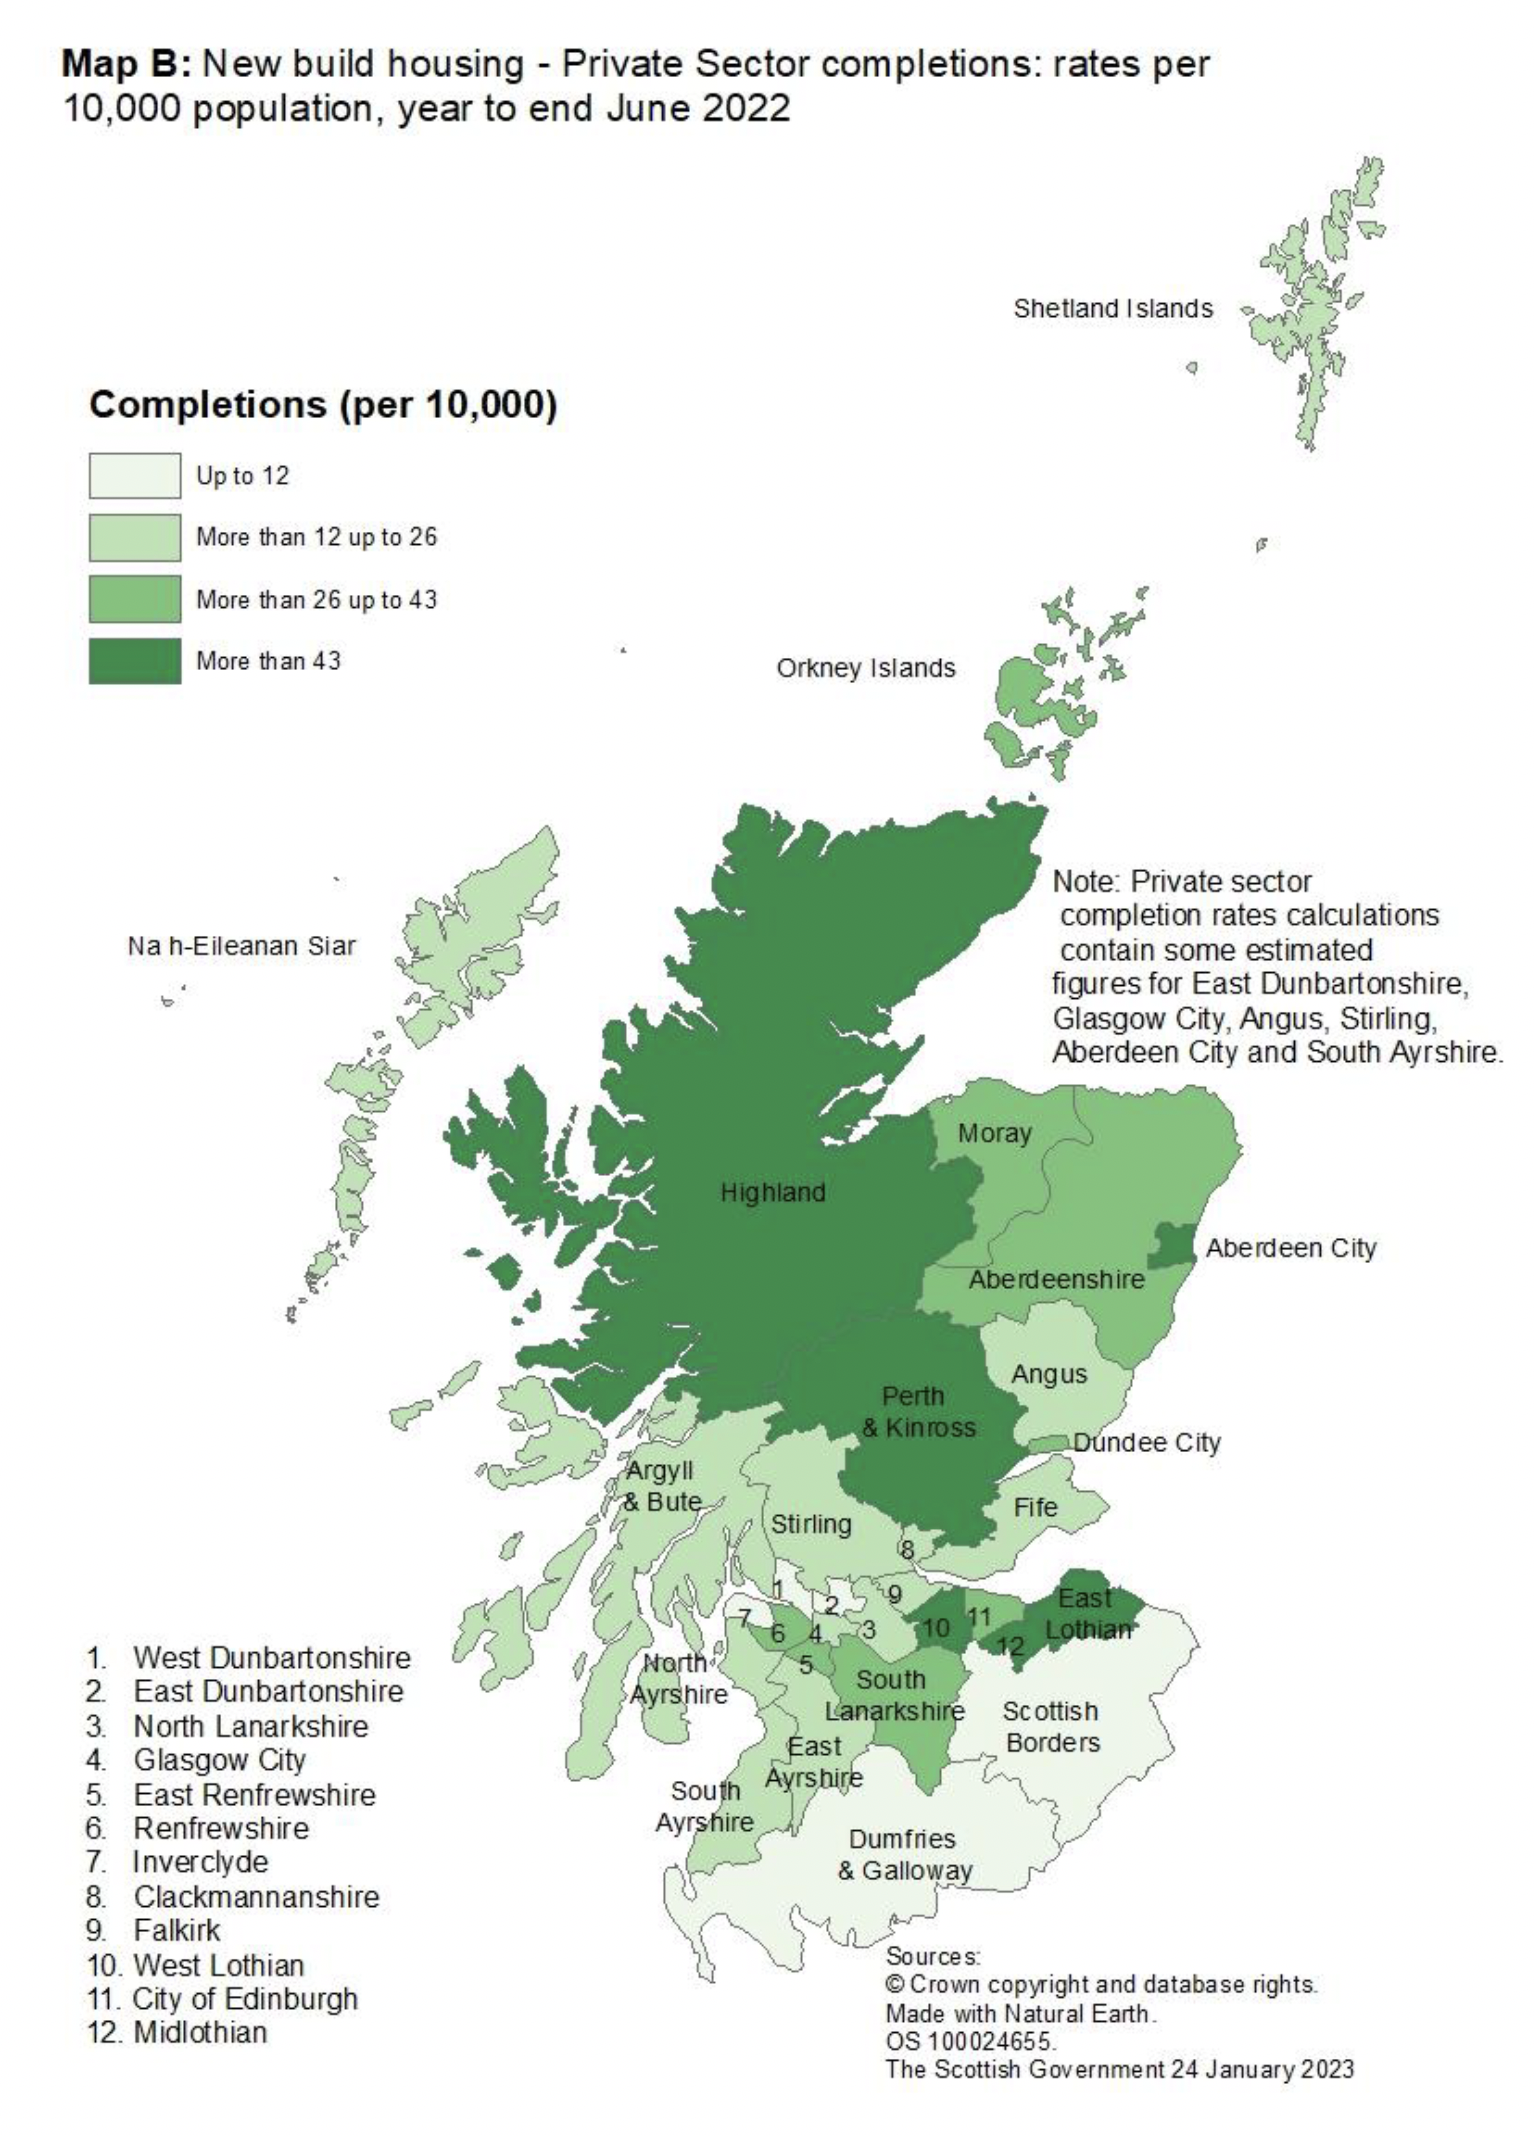 Map B: New build housing – A map of local authority areas in Scotland showing private sector completion rates per 10,000 population for year to end June 2022. The highest rates were observed in Aberdeen Ctiy, East Lothian, Highland, Midlothian and Perth & Kinross with the lowest rates observed in West Dunbartonshire, Dumfries & Galloway, Scottish Borders, Inverclyde and East Dunbartonshire.